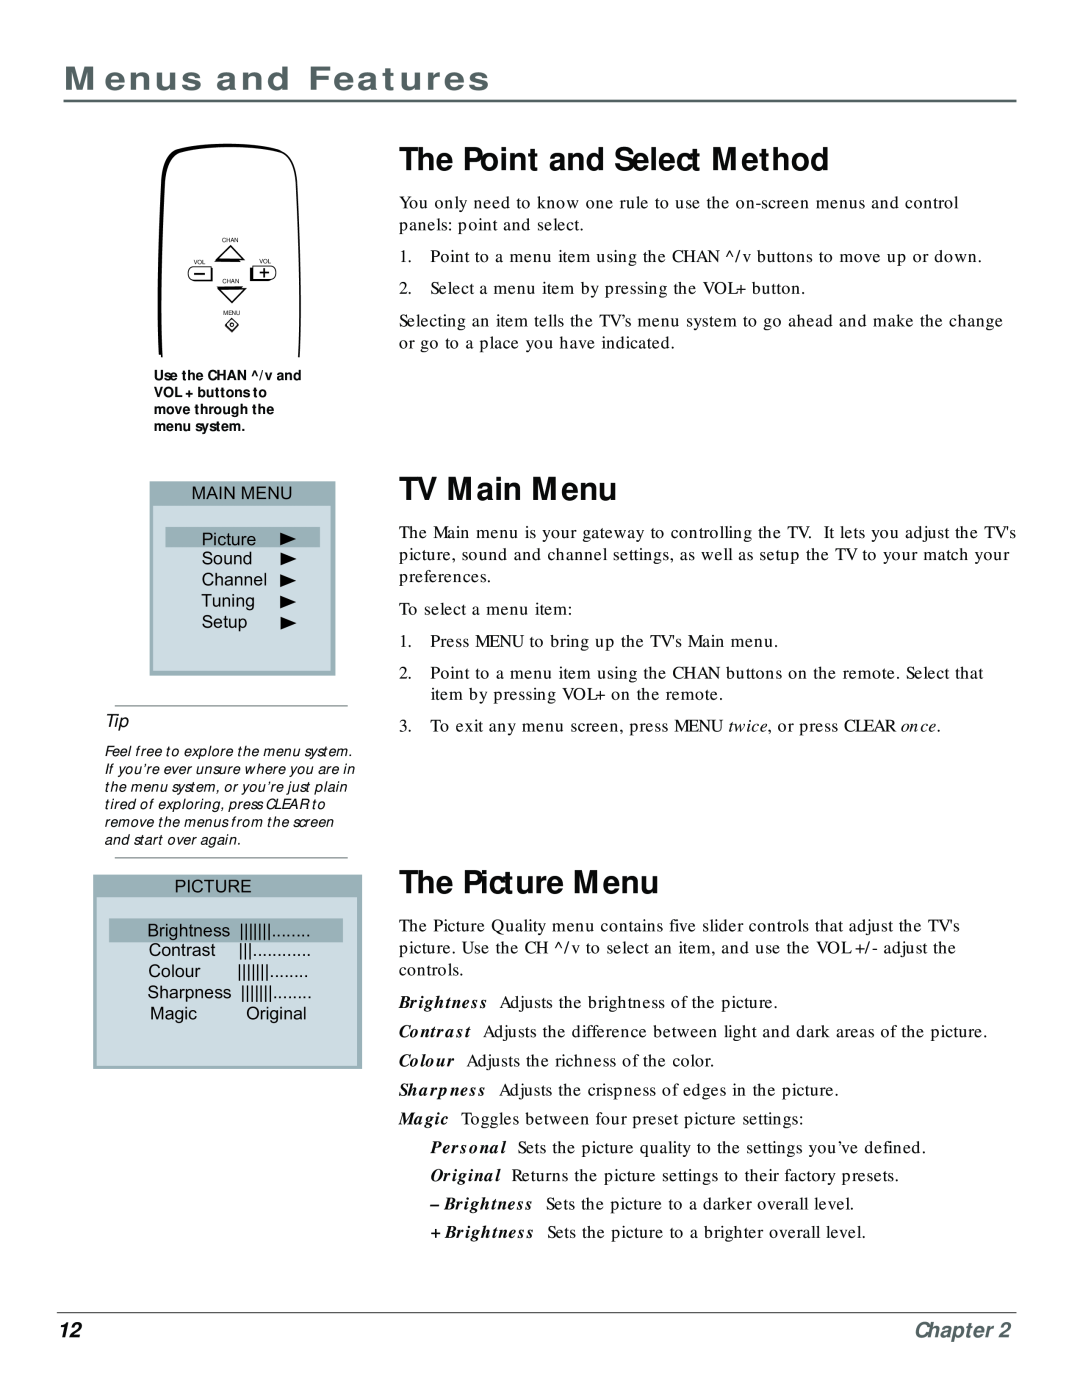 RCA CR20310 manual Menus and Features, The Point and Select Method, TV Main Menu, The Picture Menu, Chapter 